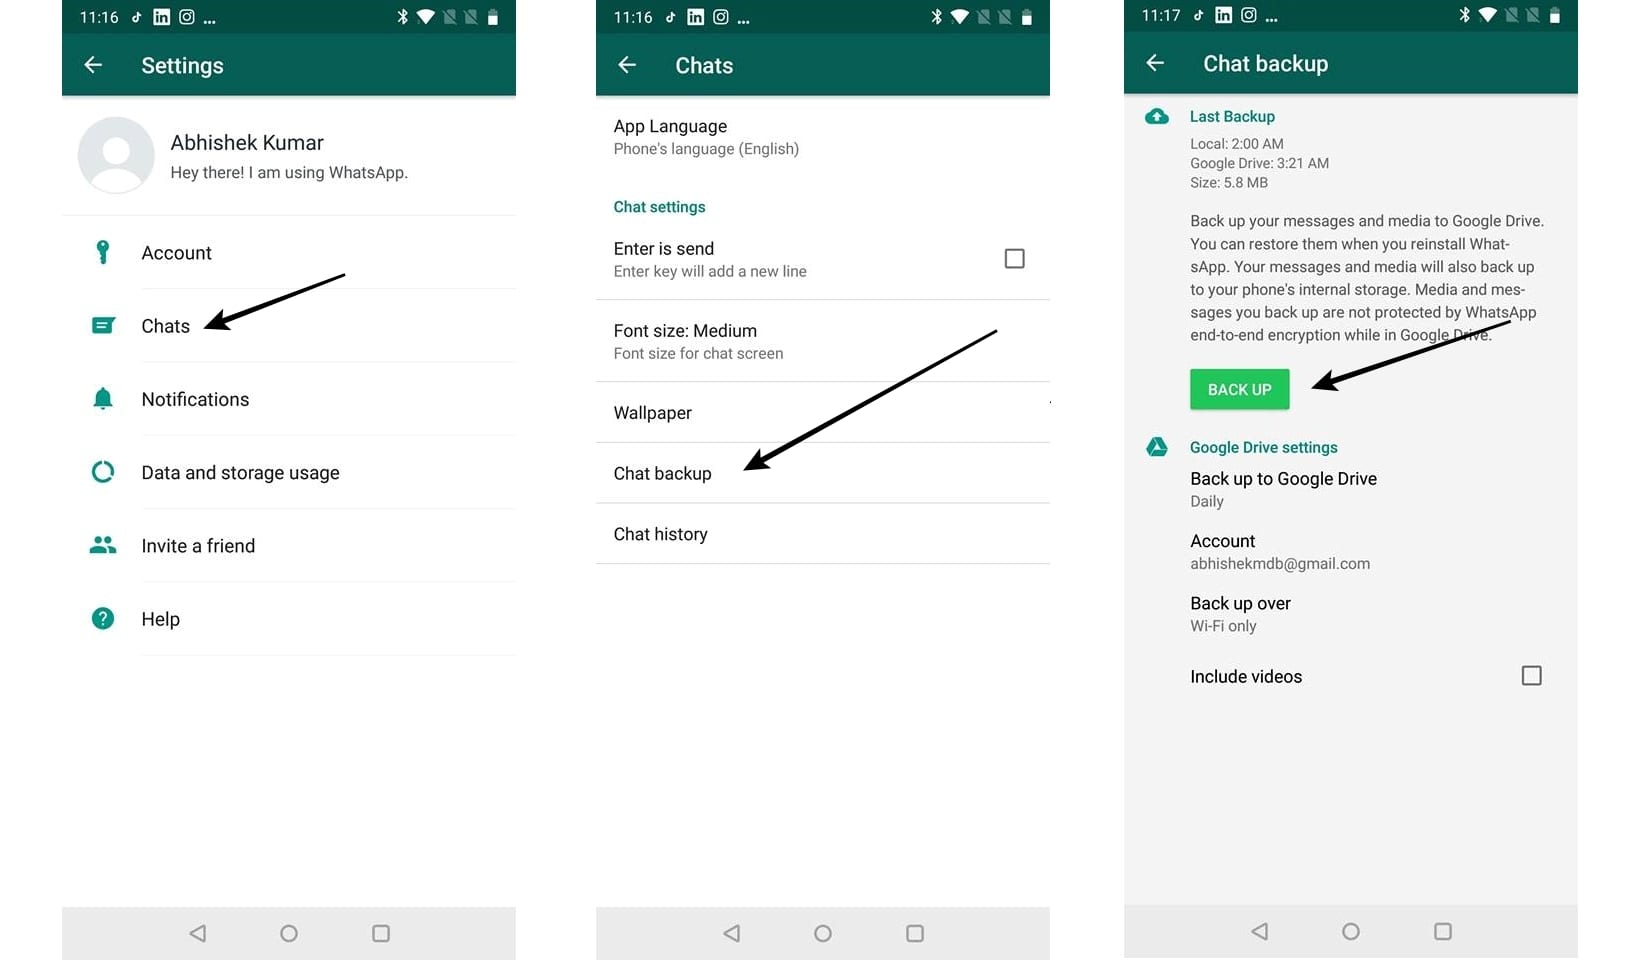 WhatsApp will soon delete all your chat, photos and videos - How to backup